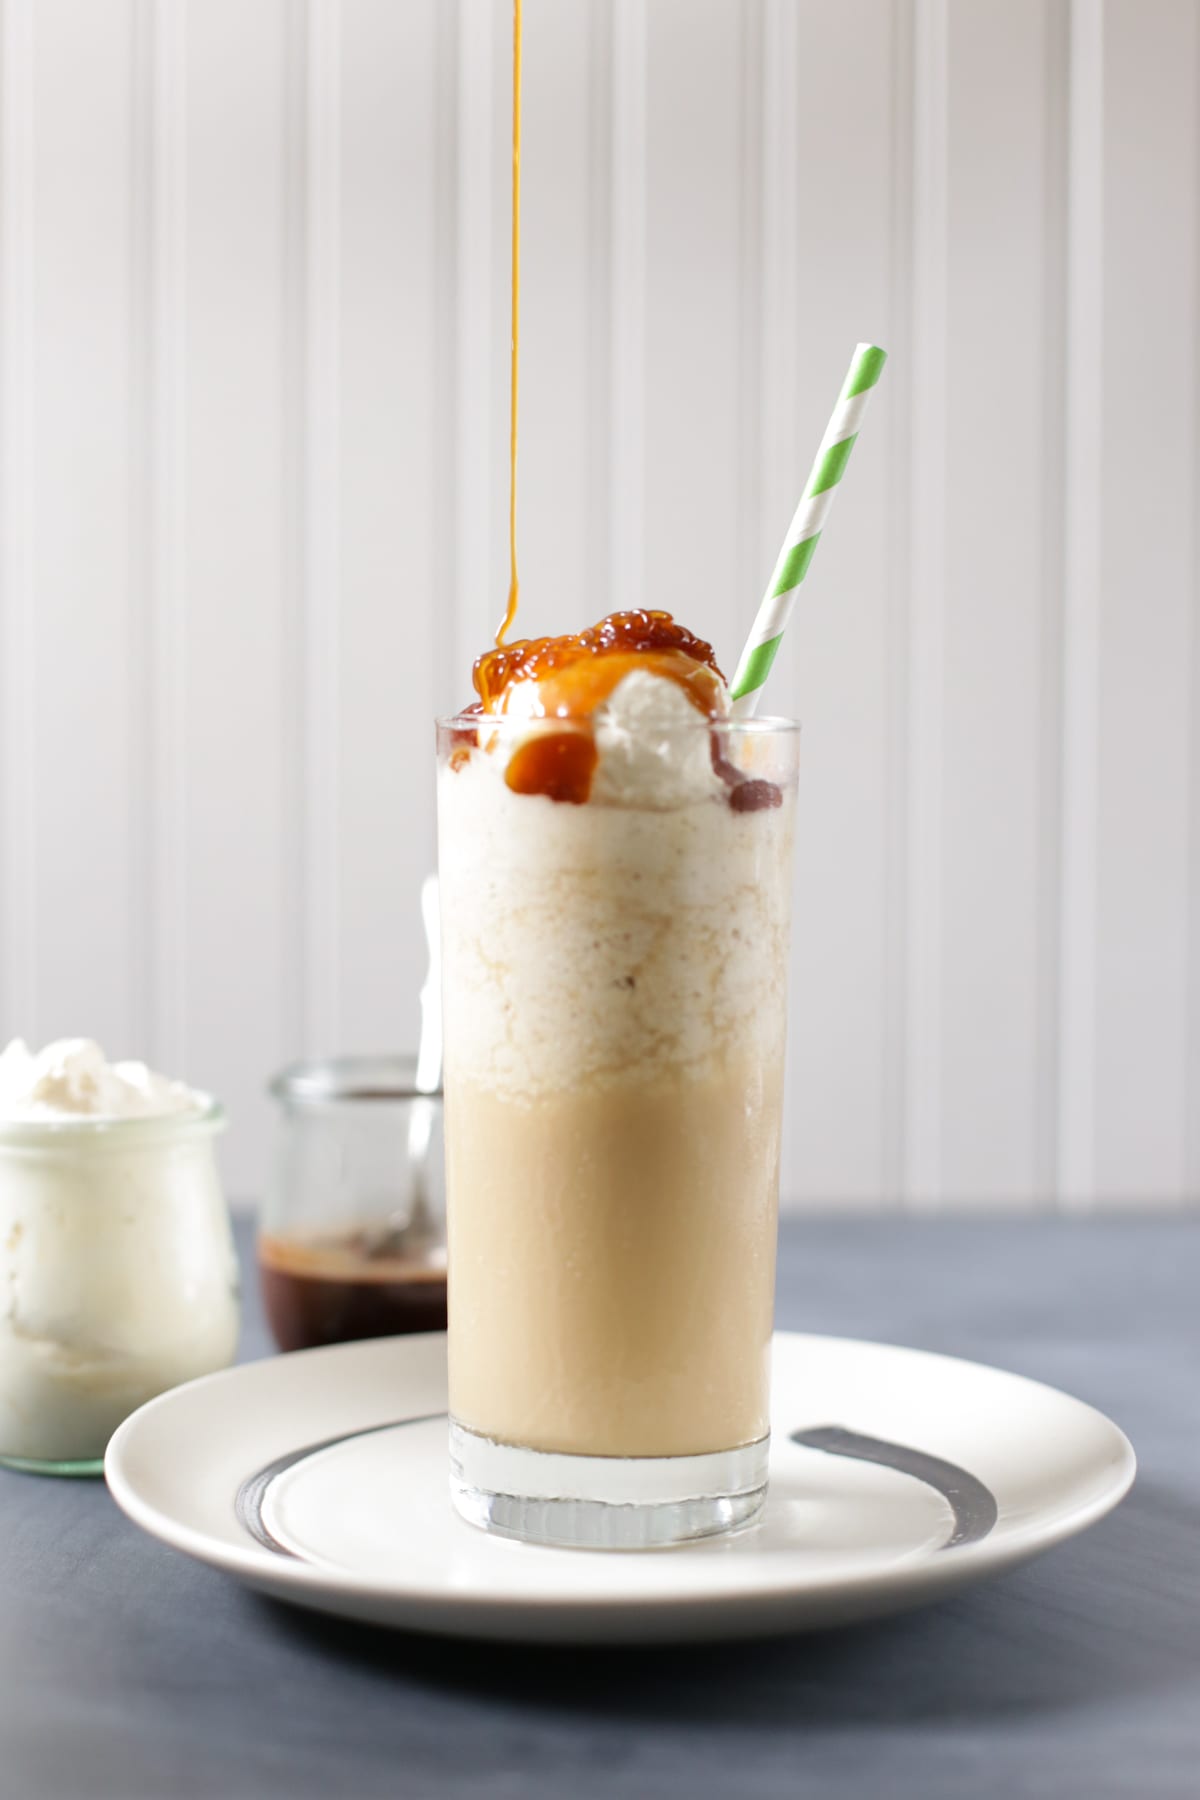 A DIY Frappuccino-like recipe made with real food ingredients. This homemade DIY drink is even better than the original and it all comes together in 60 seconds.